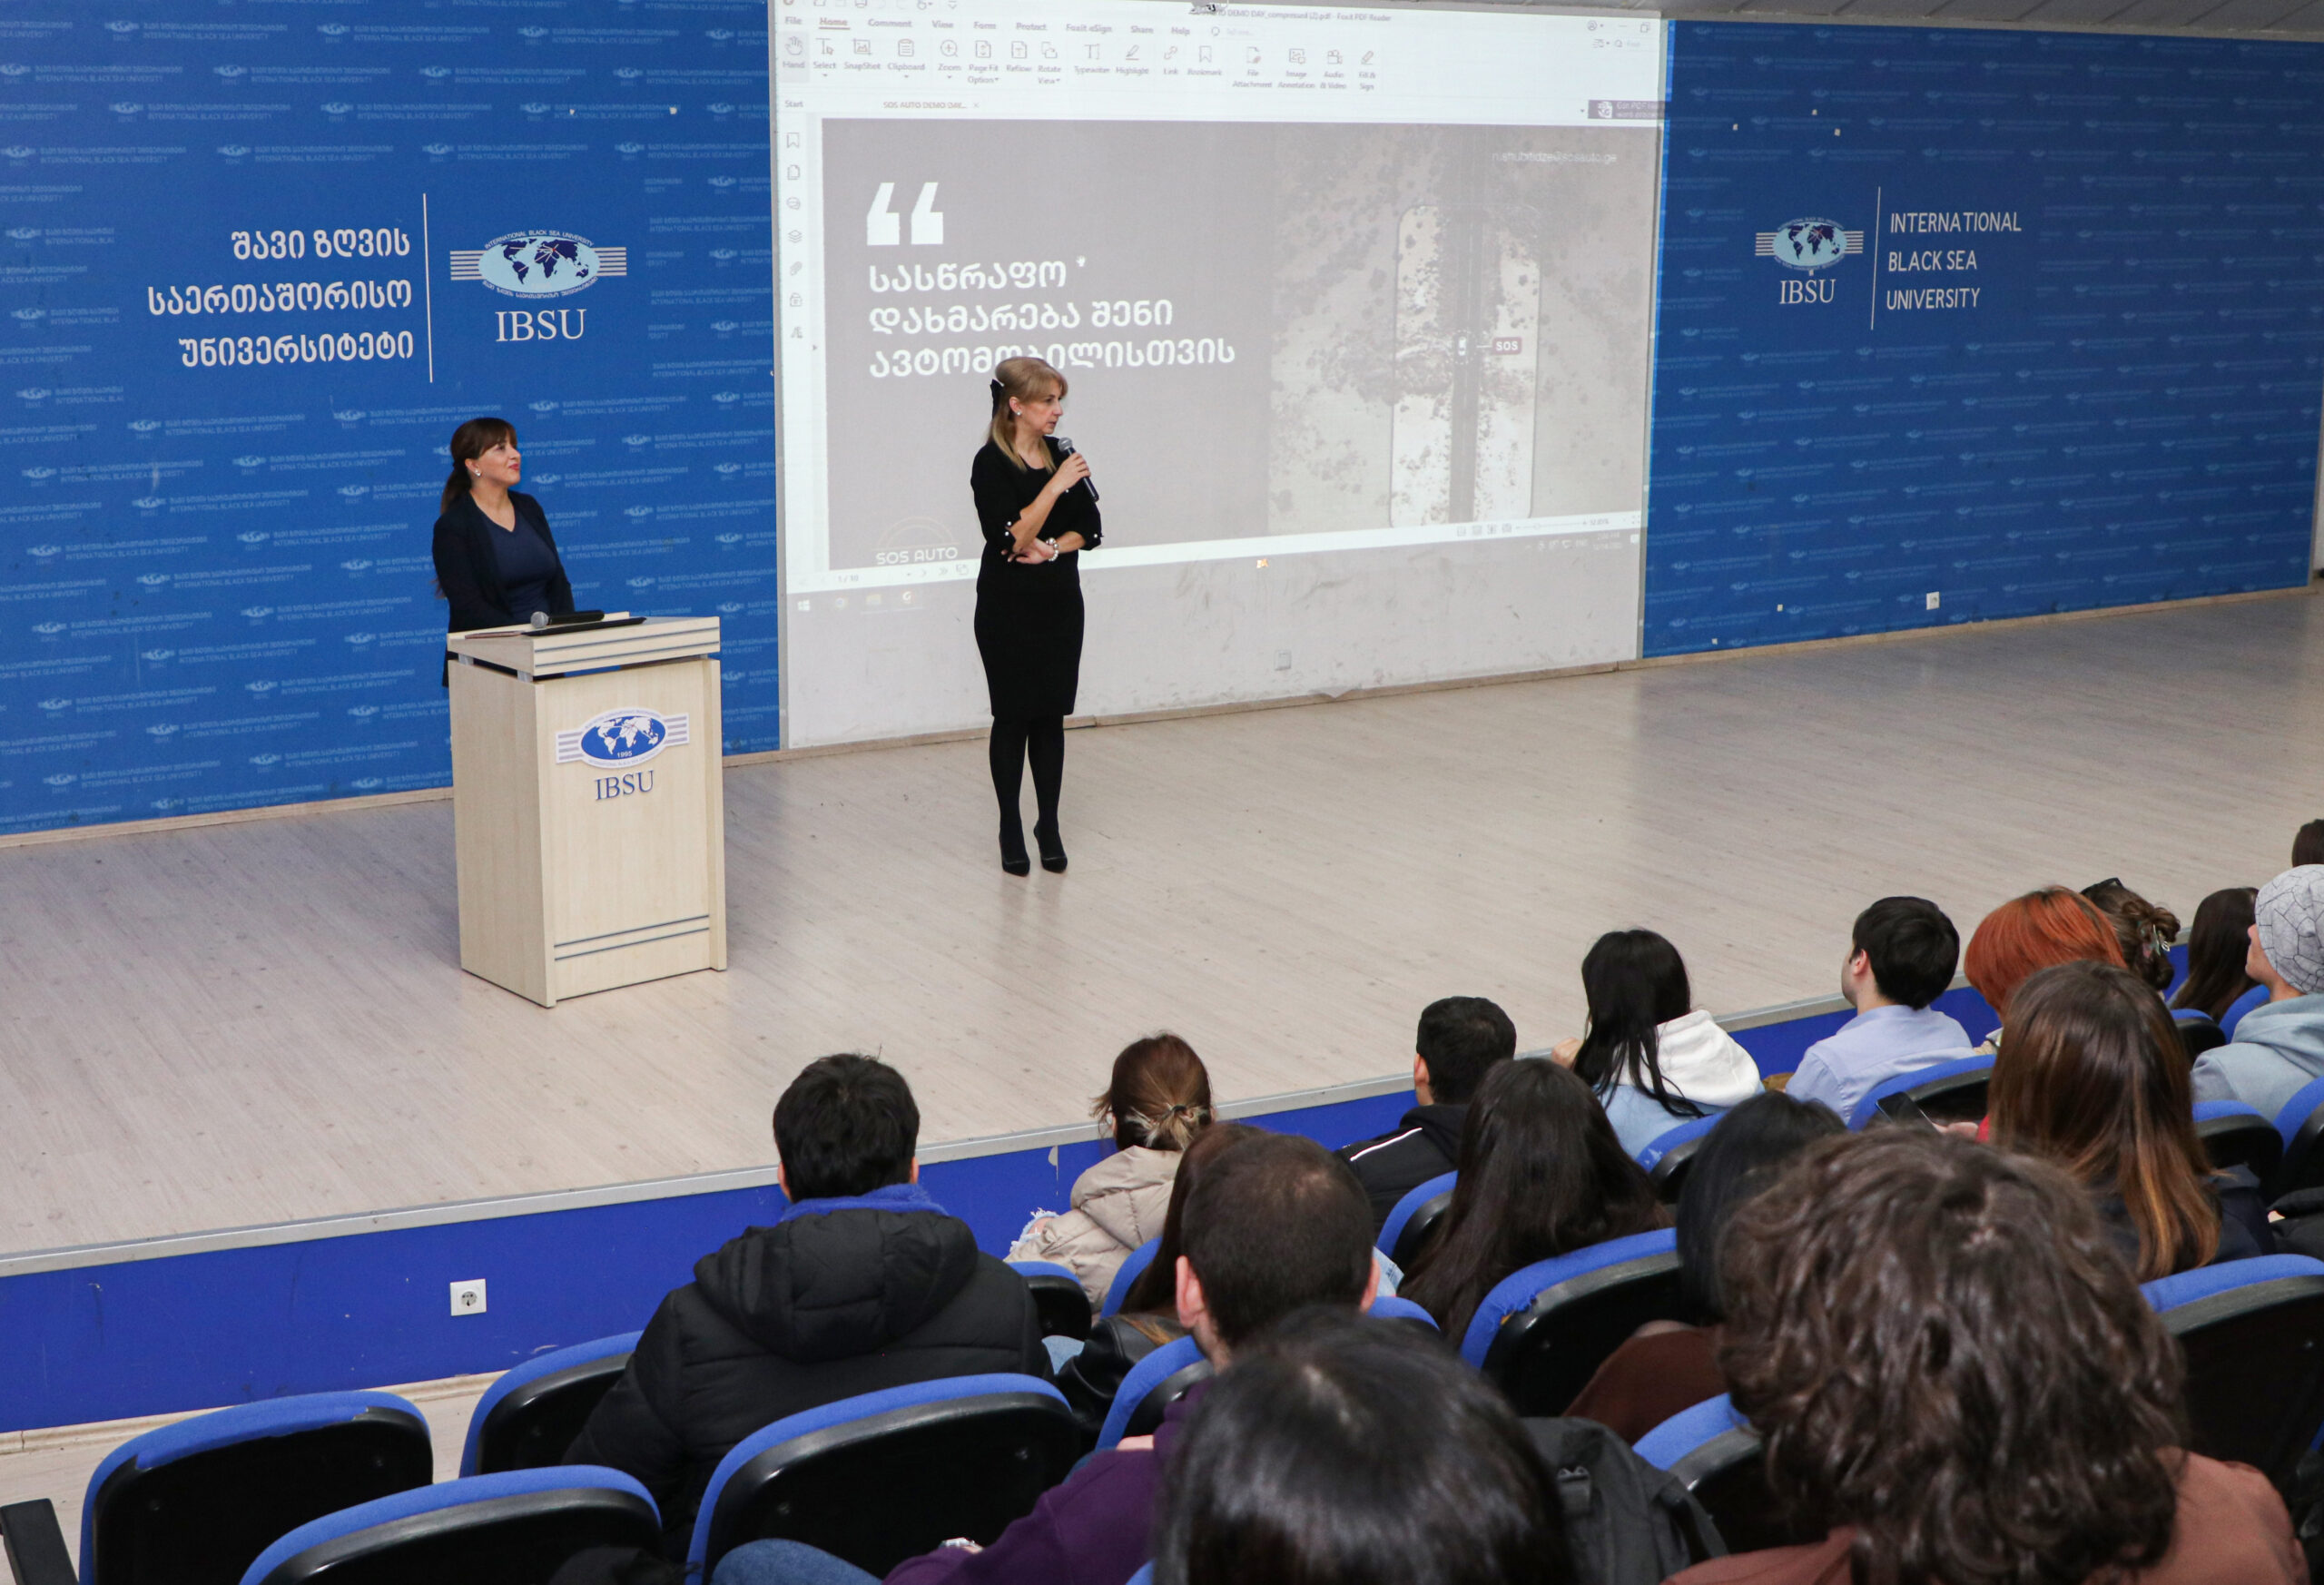 The master class entitled "A path from idea to startup" was held in IBSU